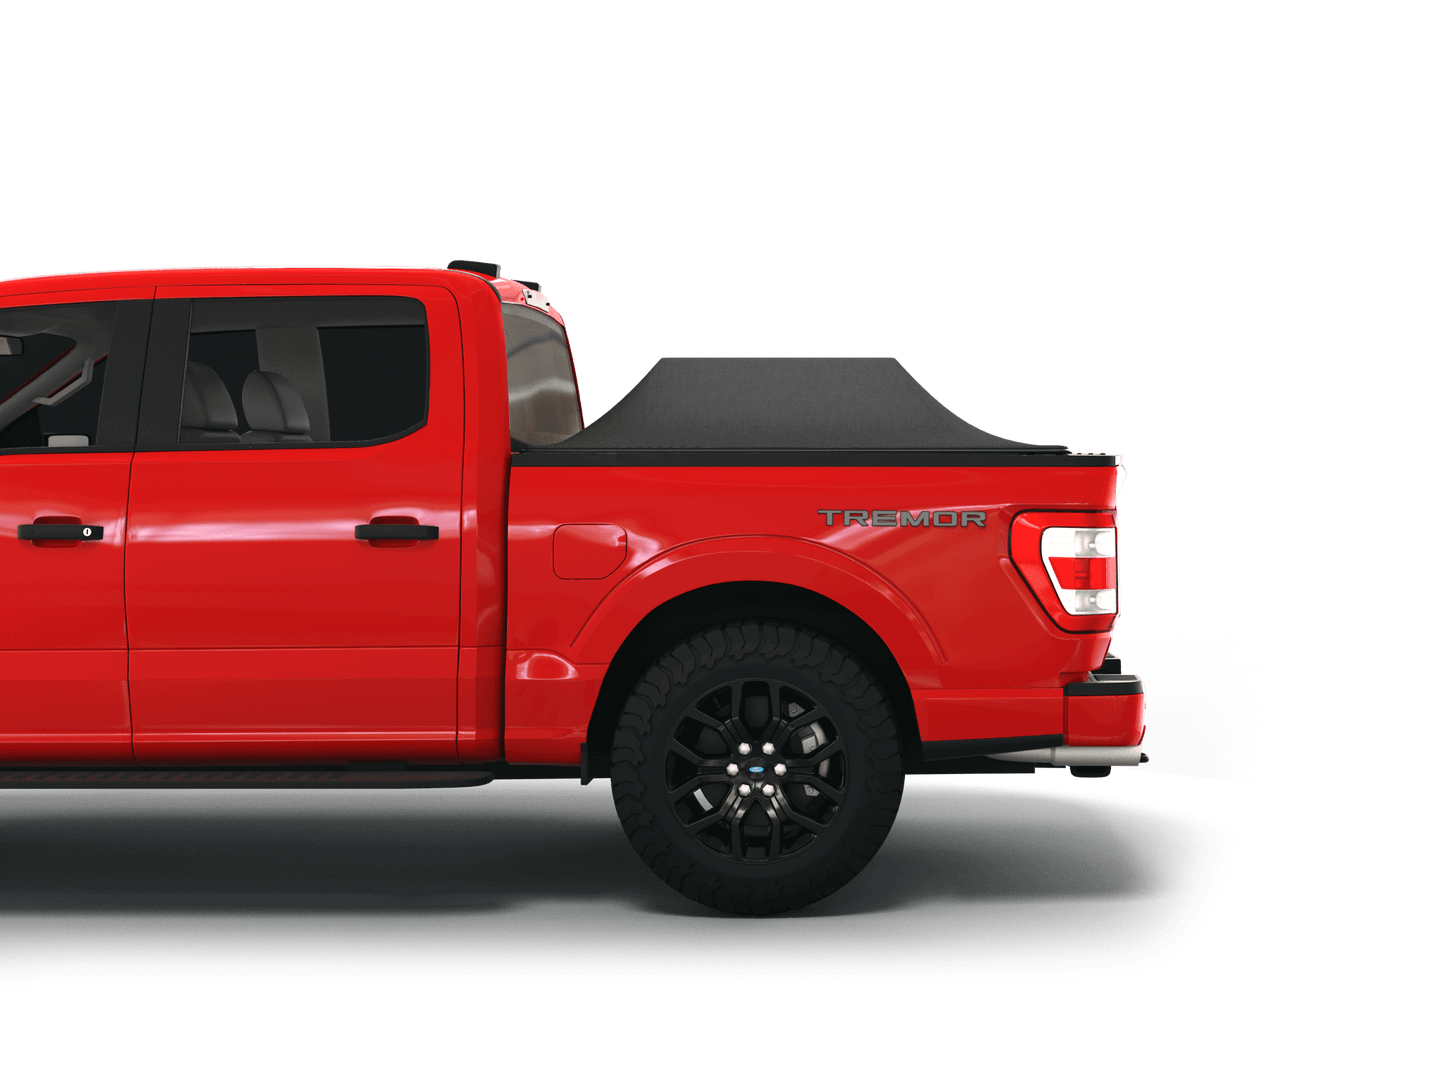 Red Ford F-250 / Ford F-350 with Sawtooth Stretch tonneau cover expanded over cargo load